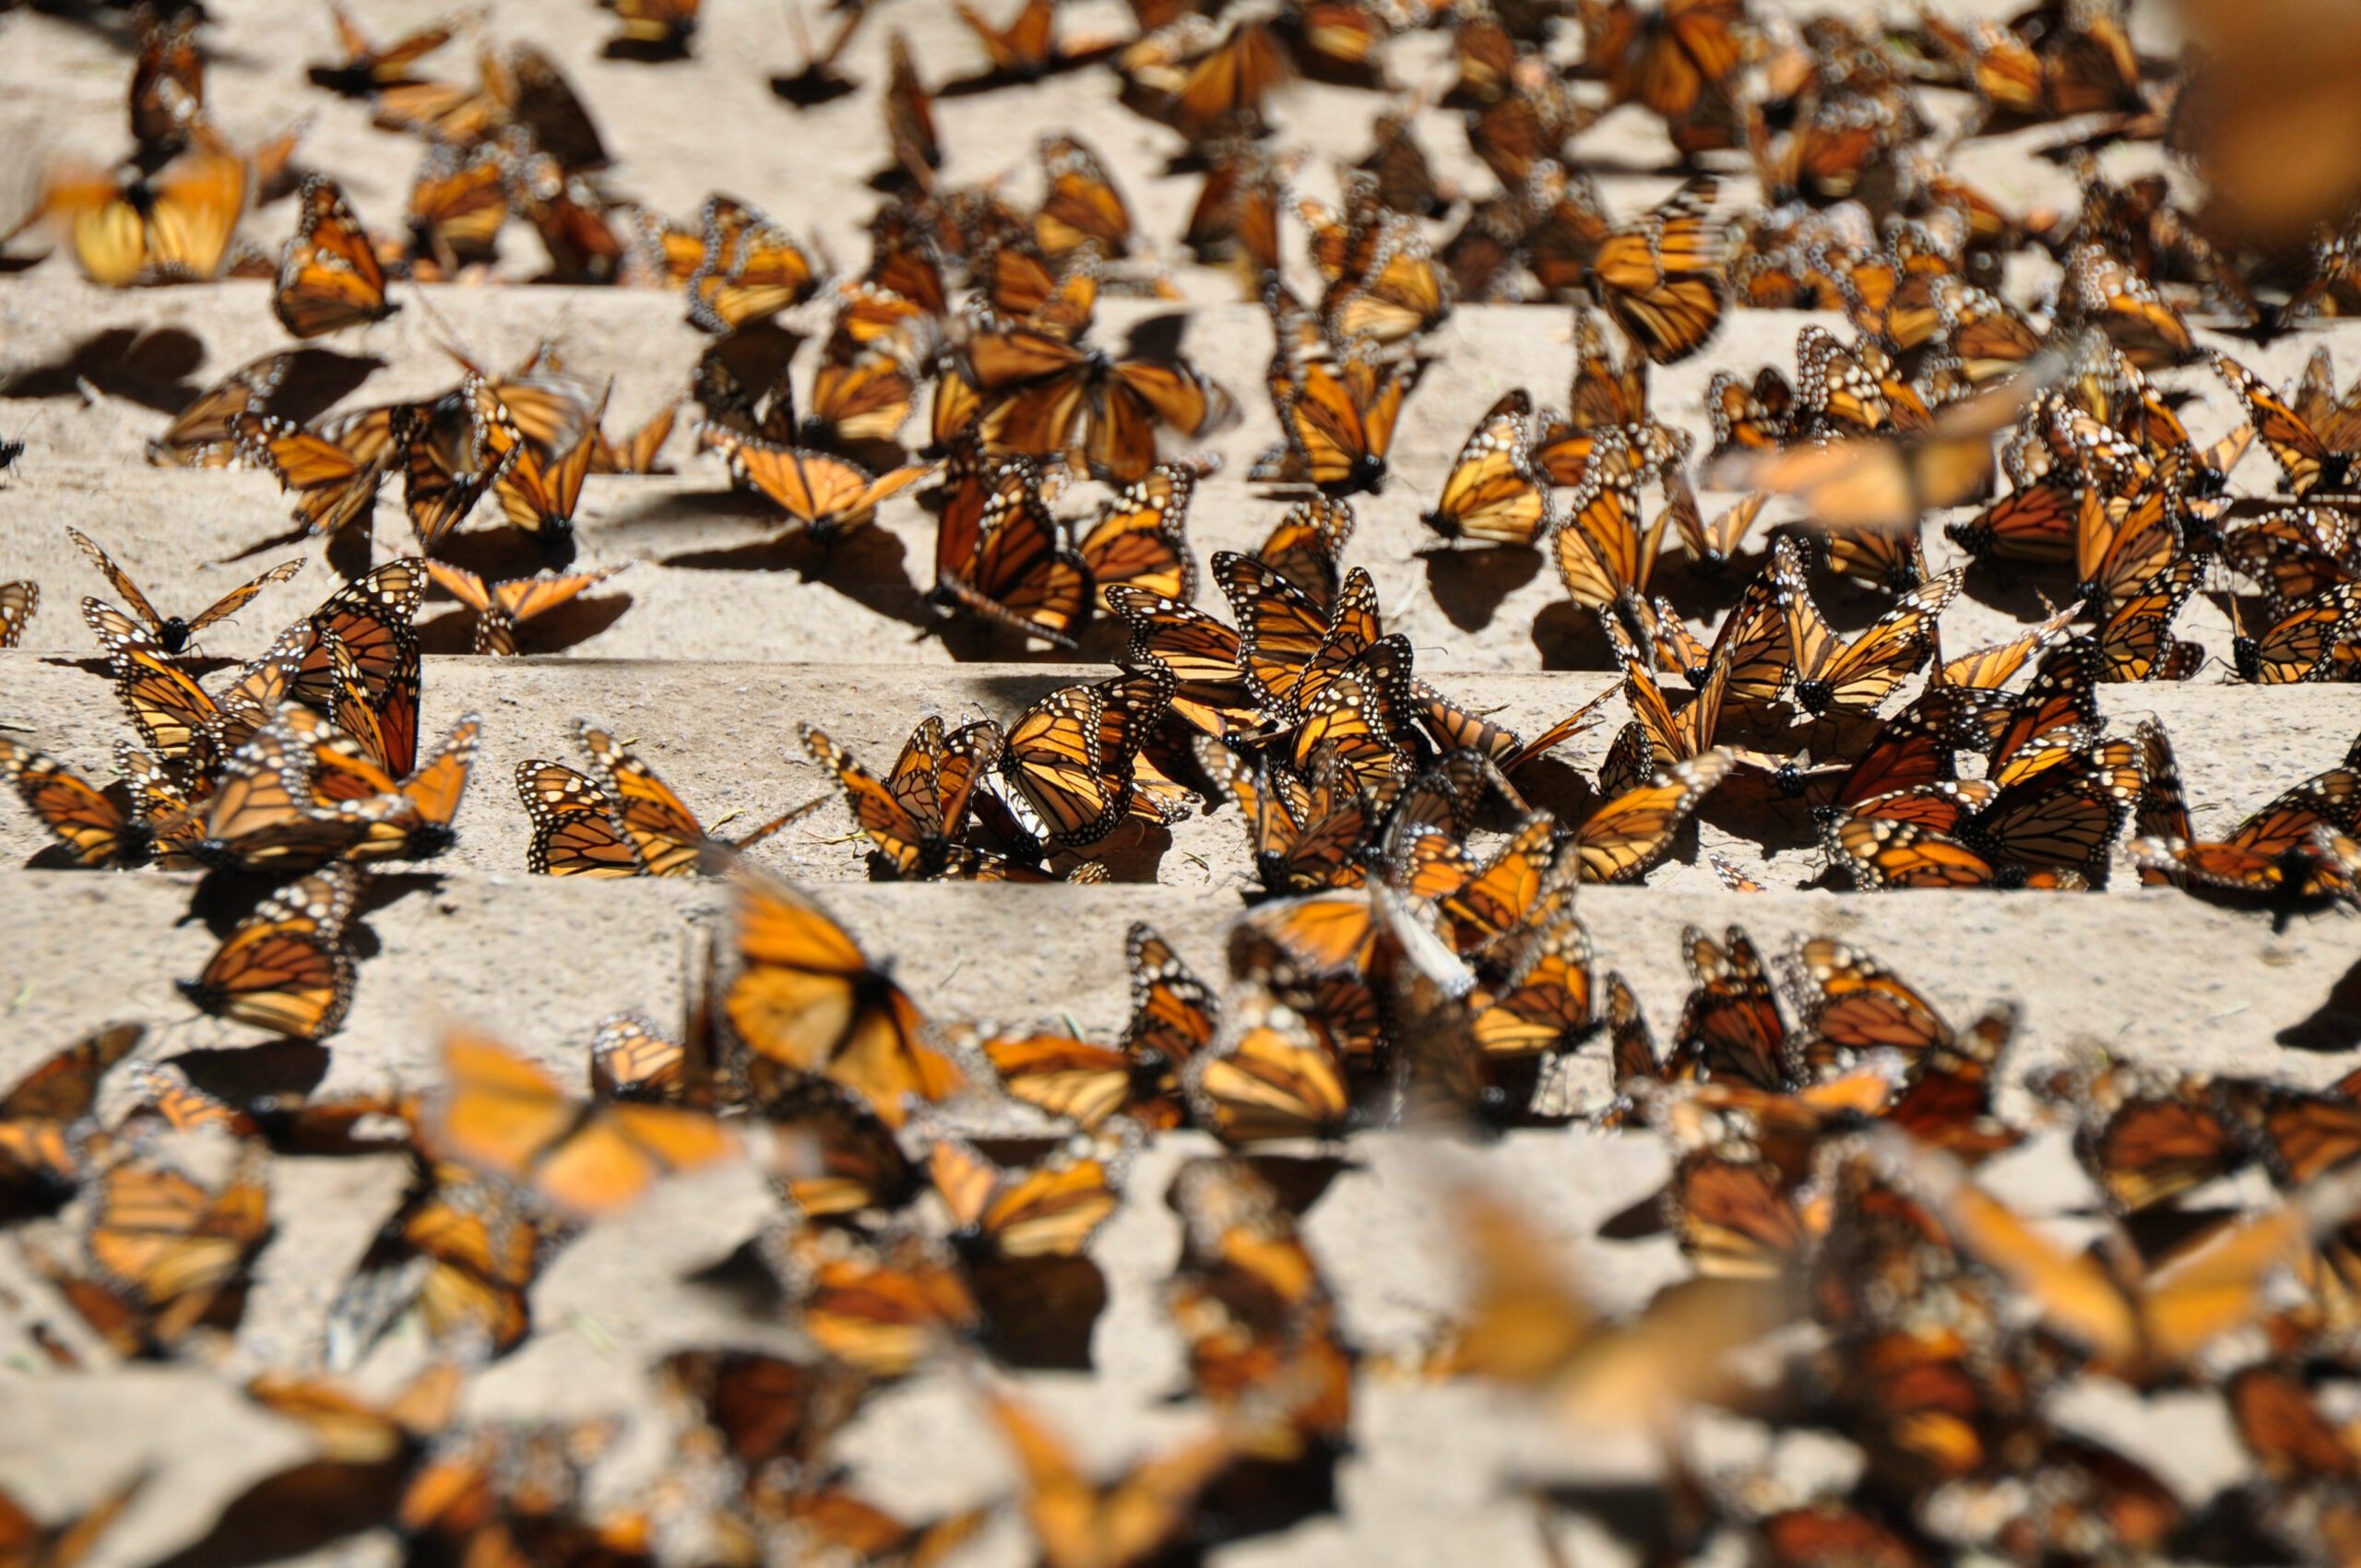 monarchs resting in the sun on sand goes to protected lands working group page when clicked on